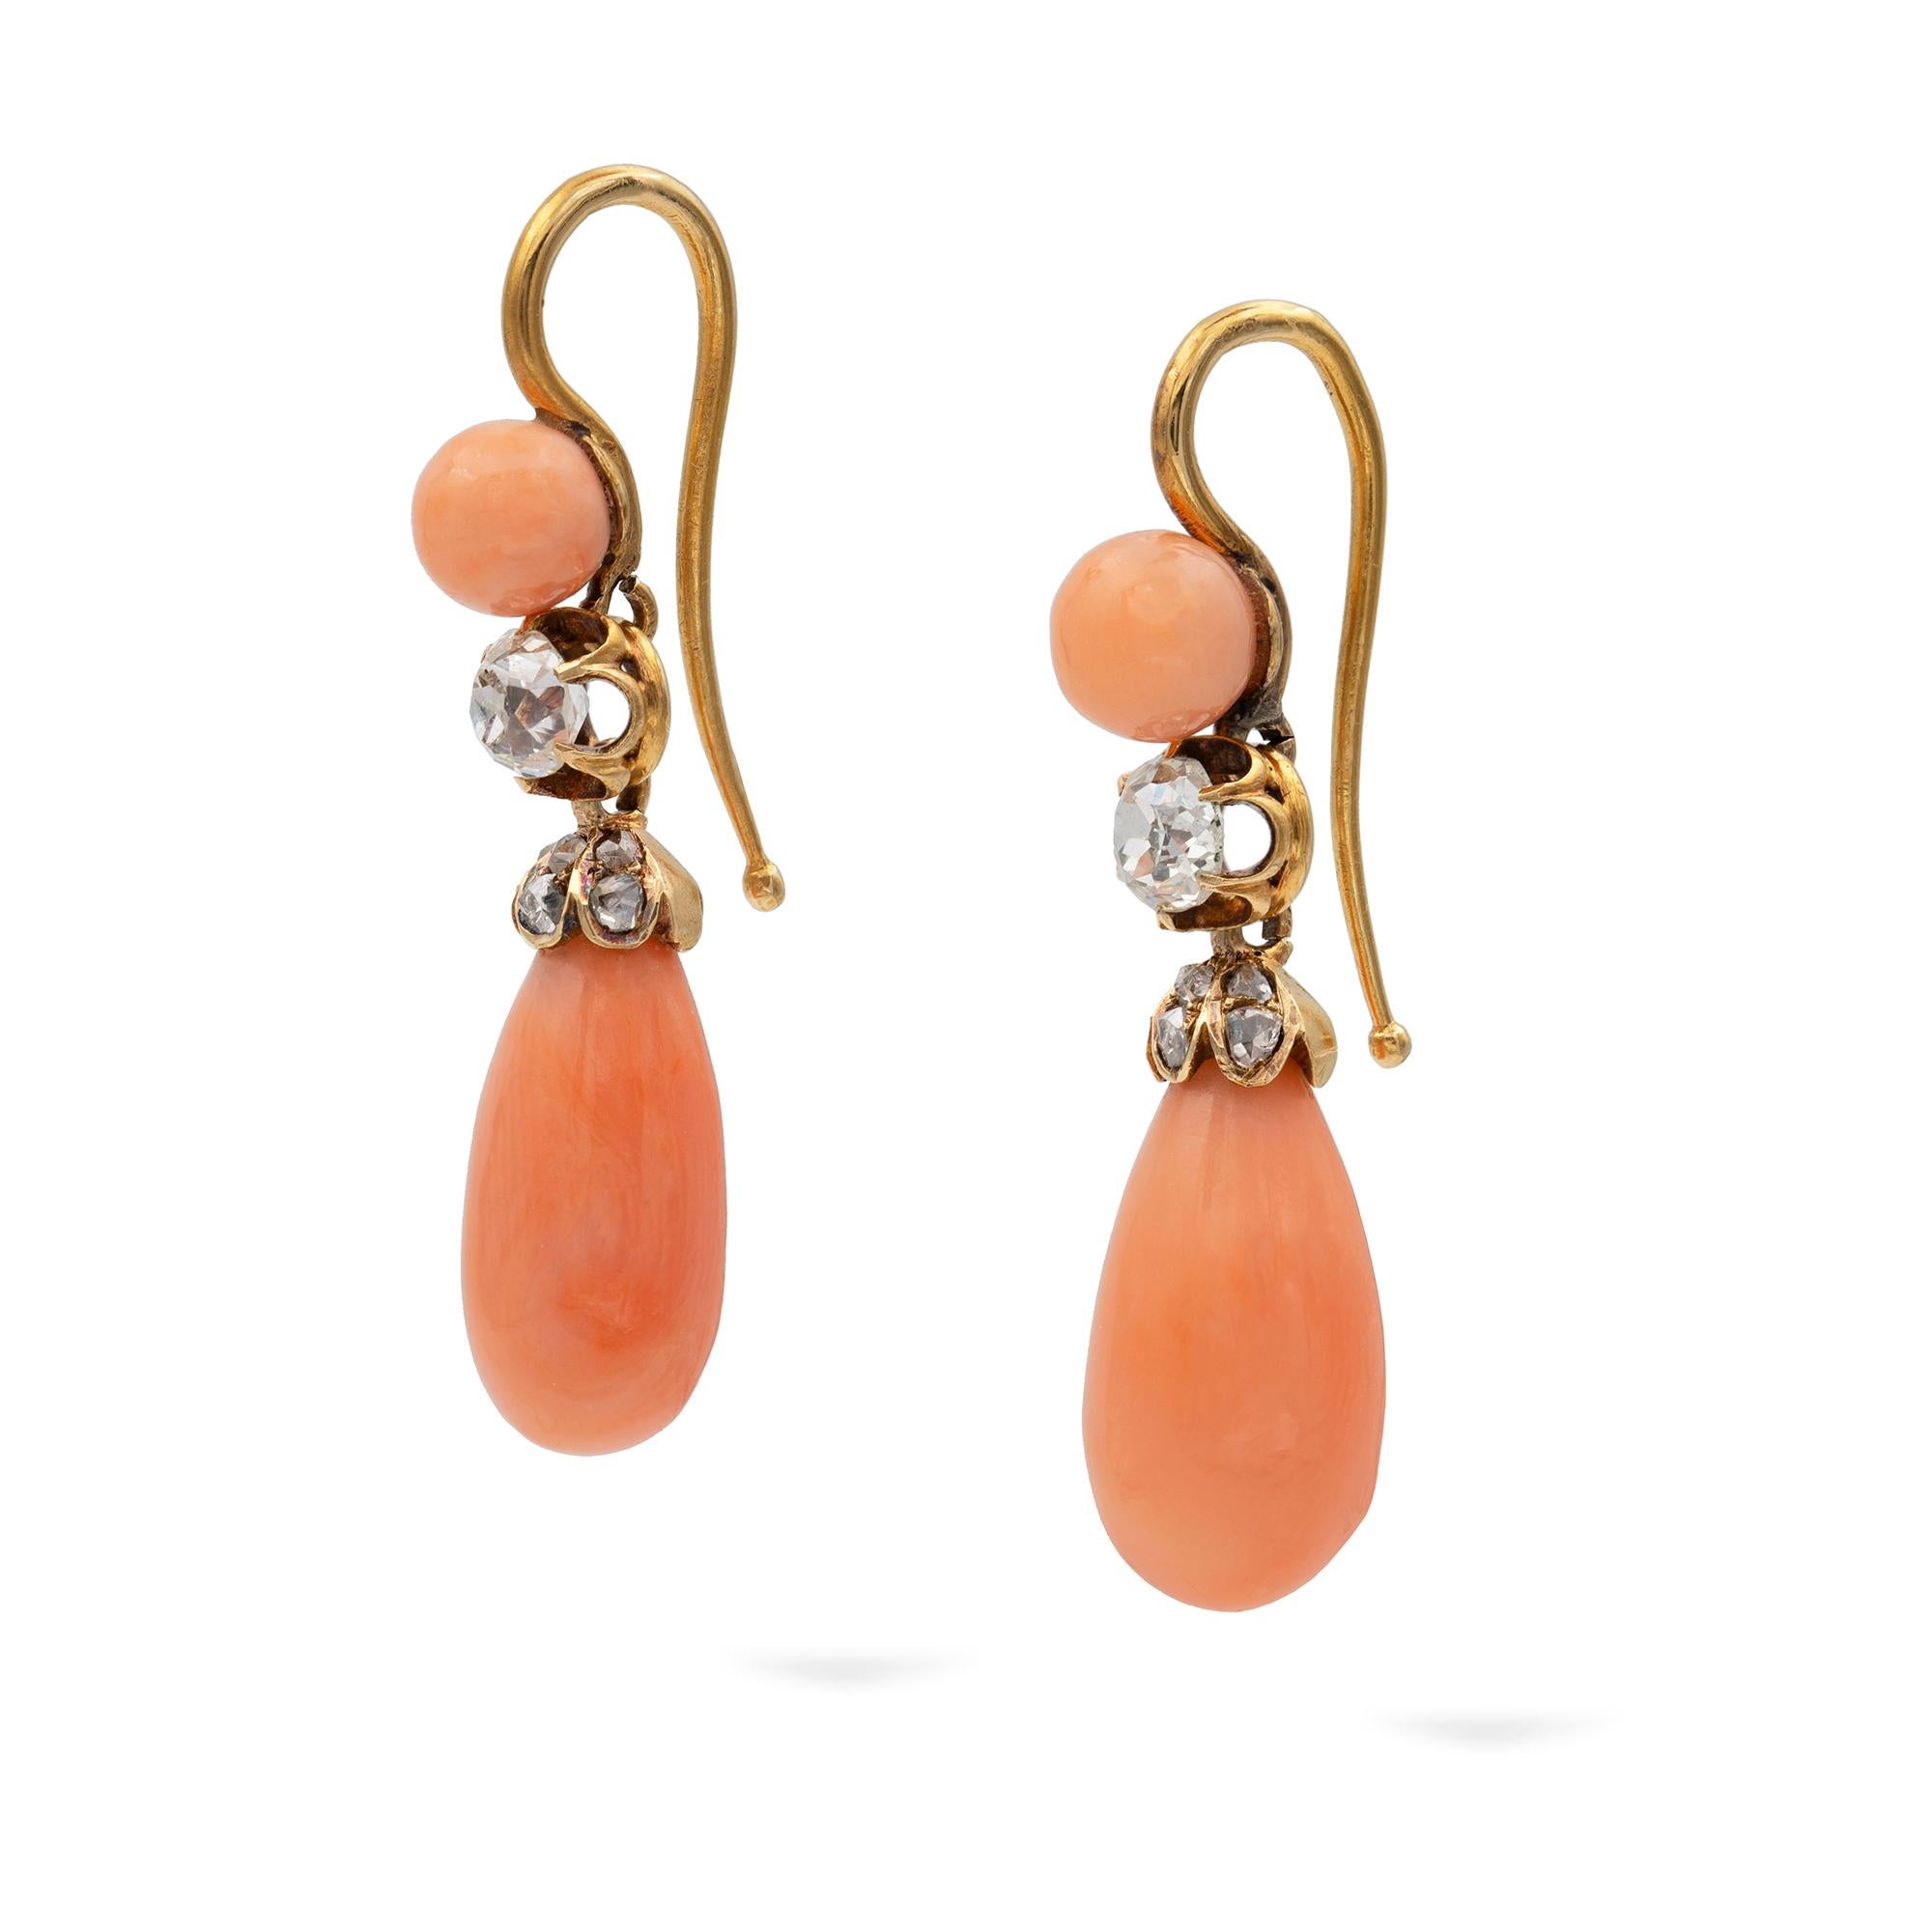 A pair of late Victorian coral and diamond drop earrings, the top of each set with a round coral ball approximately 5mm size suspending an old mine-cut diamond estimating to weigh totally 0.45 carats, set in six claw open collet, leading to a